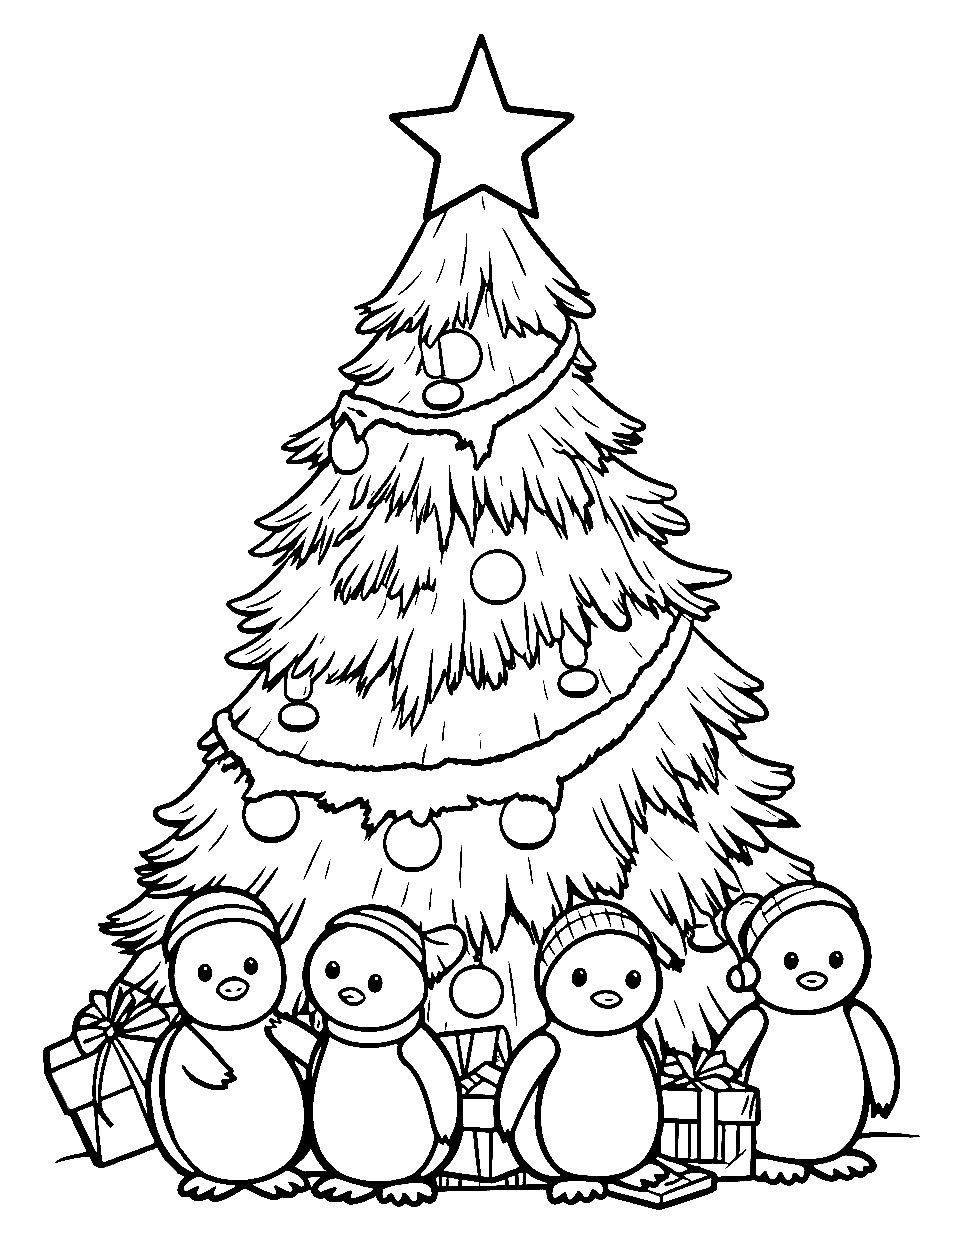 Holiday Penguins Around the Tree Coloring Page - Cute penguins waddling around a sparkling Christmas tree.